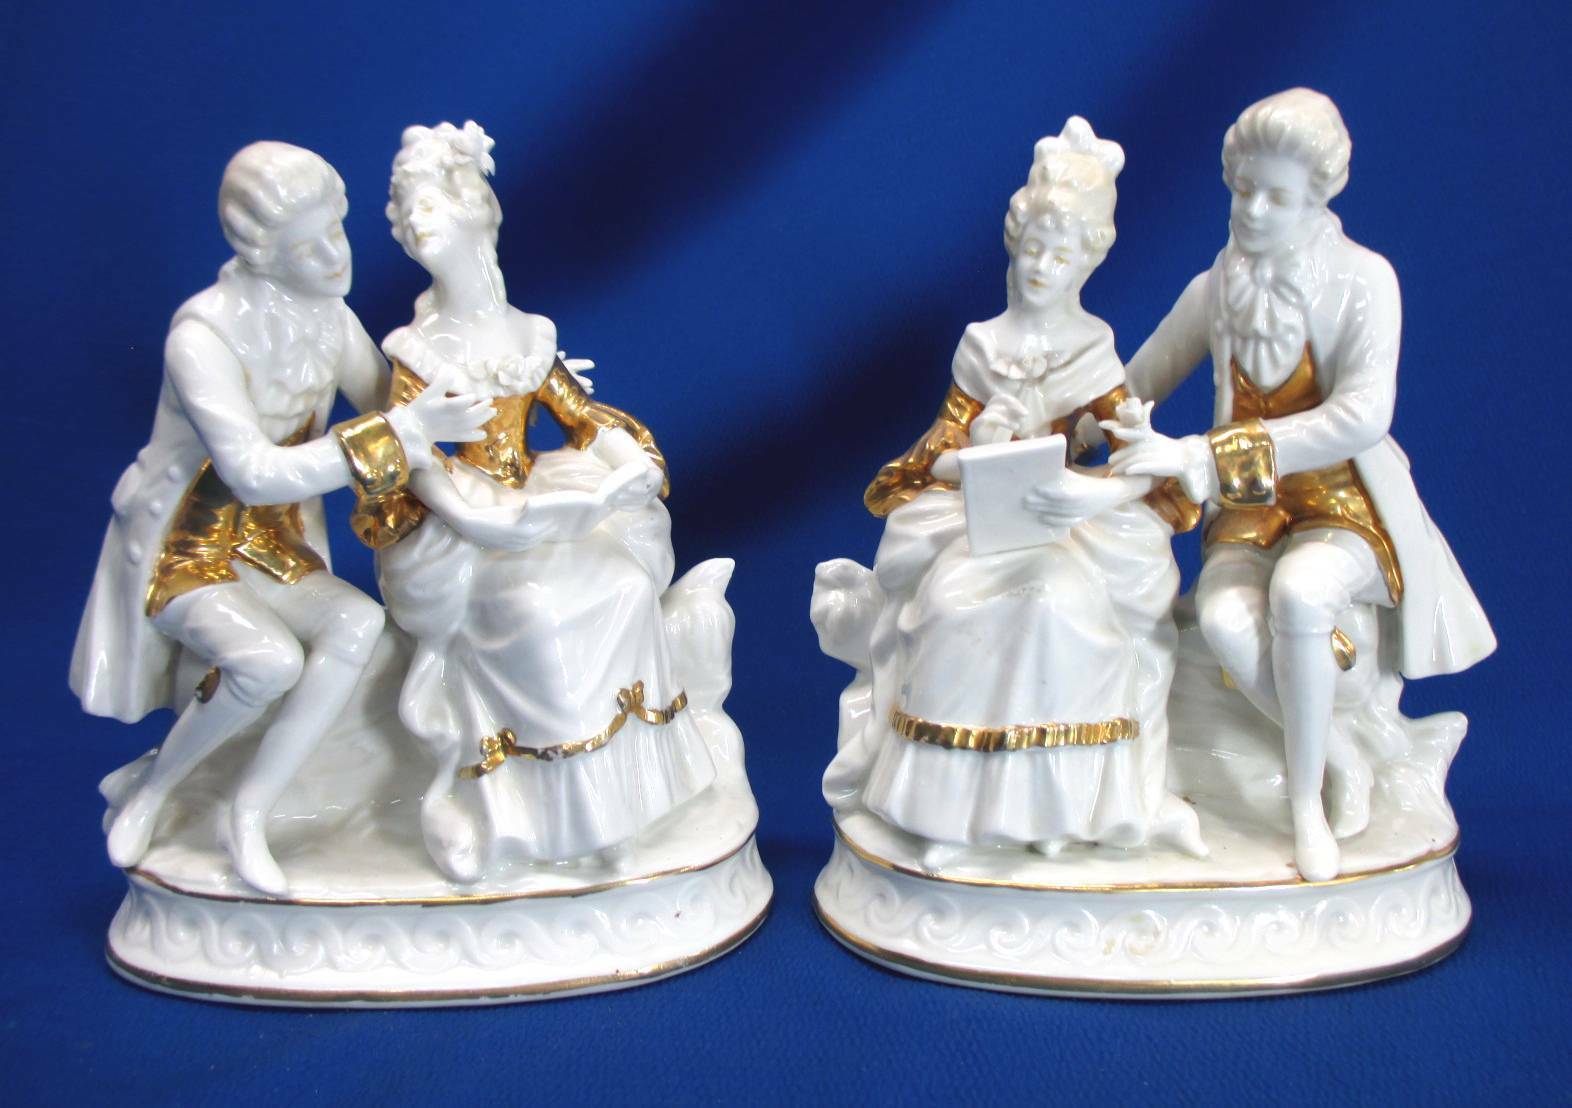 PAIR WHITE & GOLD 18TH CENTURY DRESSED FIGURINES BY ERNST BOHNE